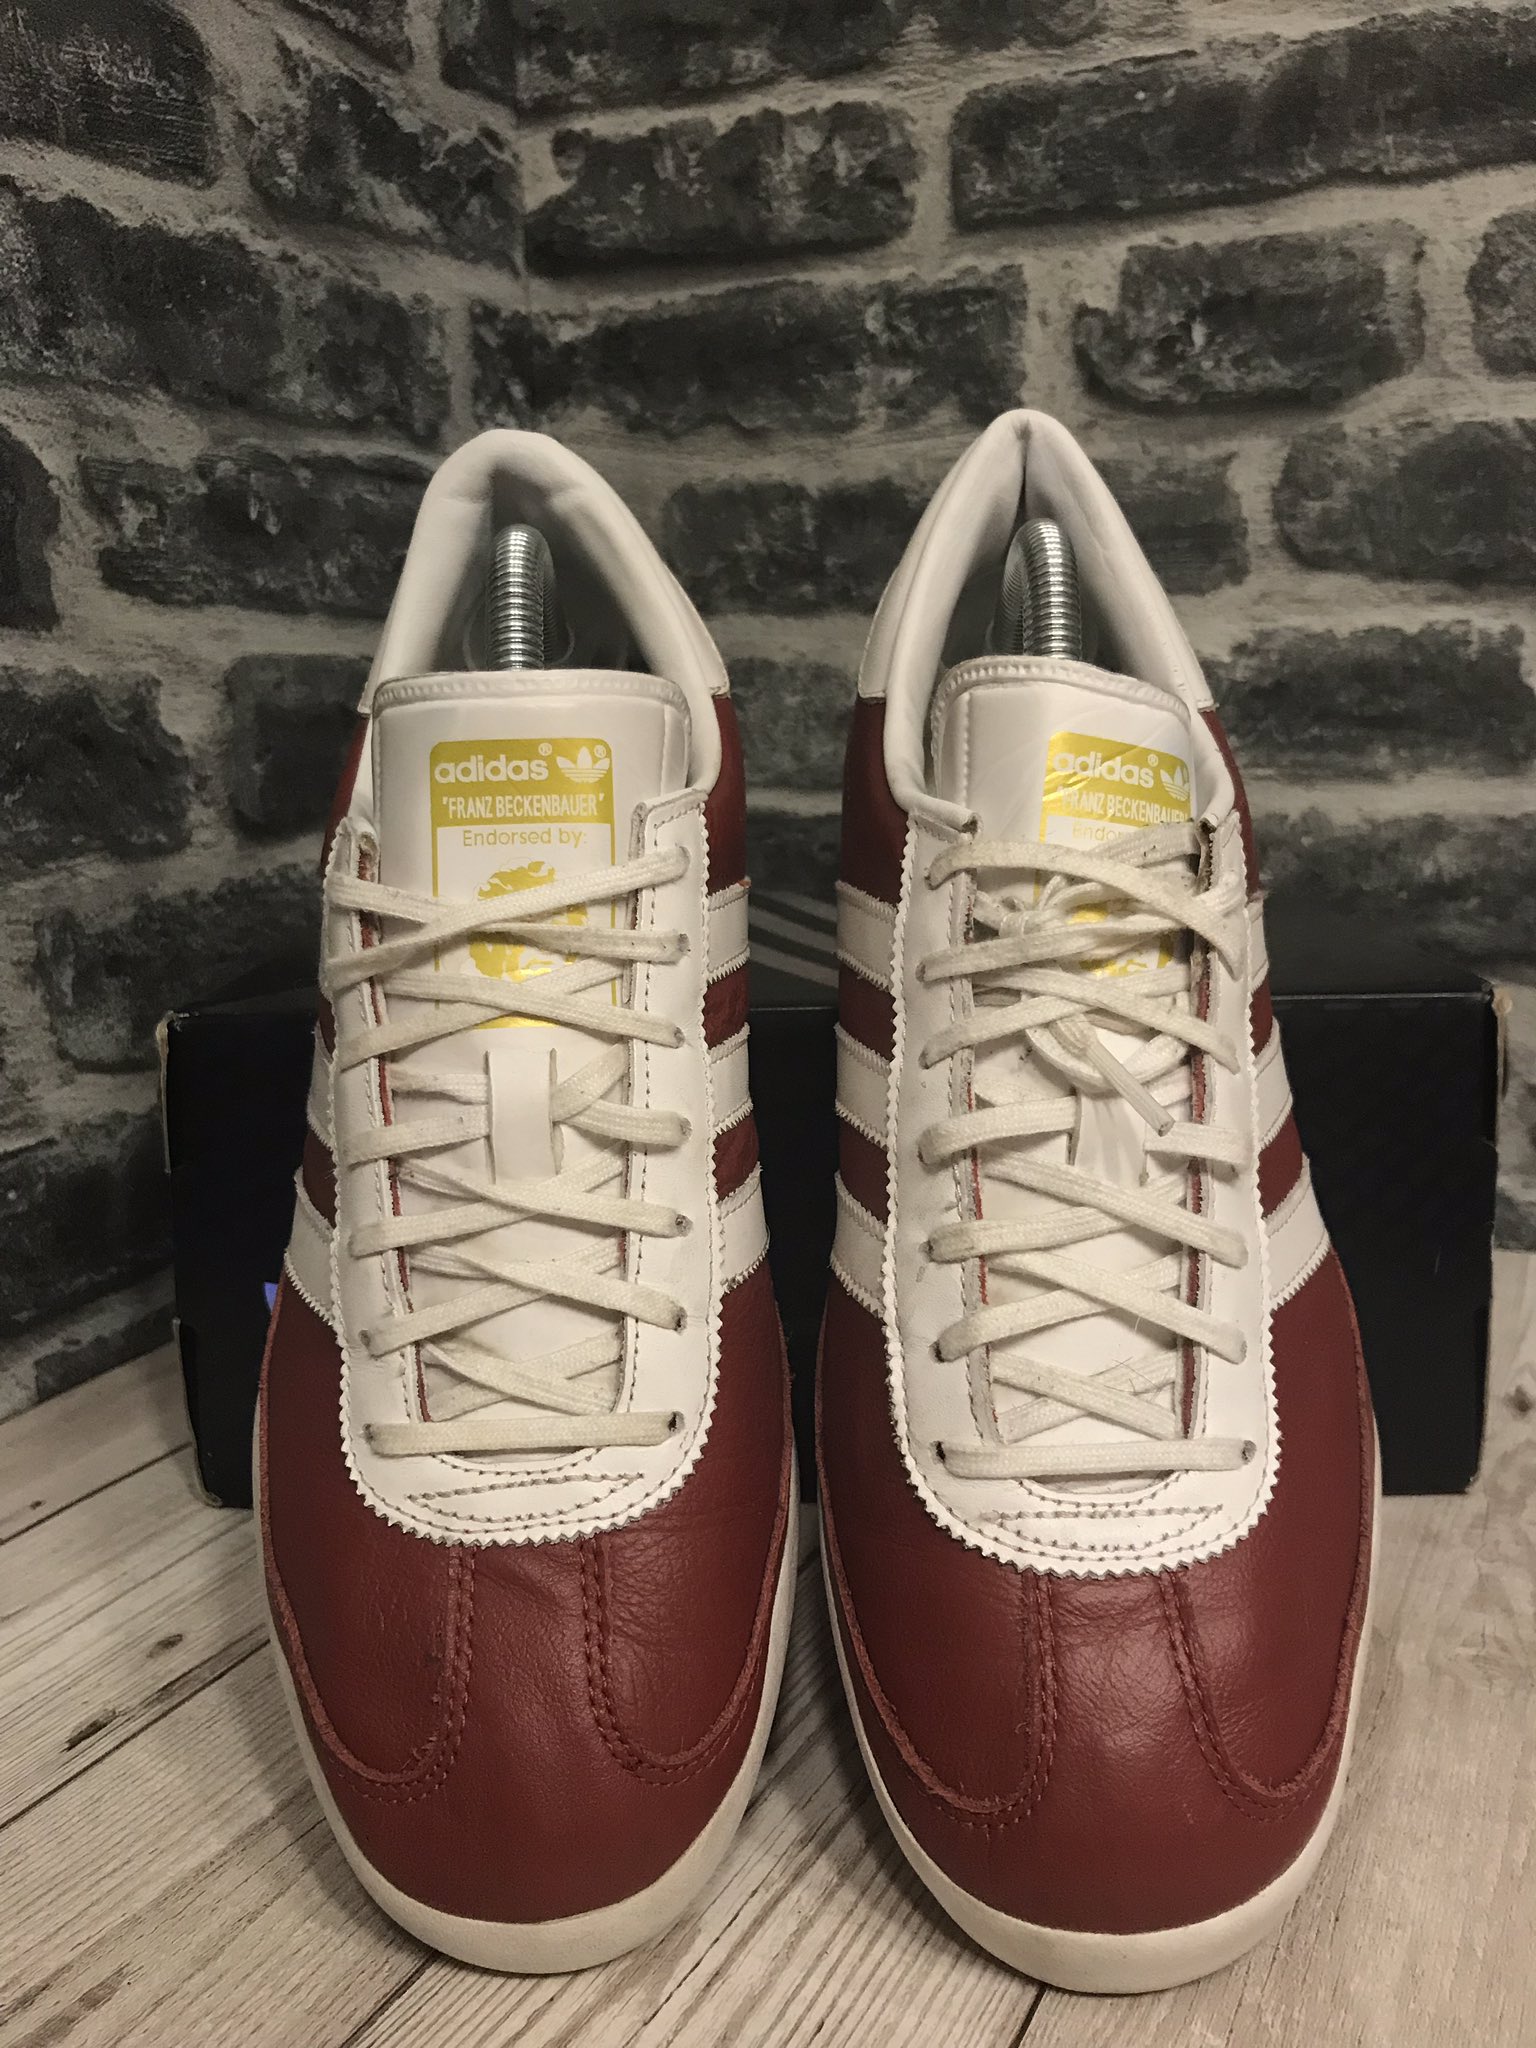 Retro Soles on Twitter: "FOR SALE:- #adidas #beckenbauer UK 8 2014 release Red White Leather CW Rare 8/10 Pre Worn £60 DELIVERED RT Appreciated DM me if you are interested /// #